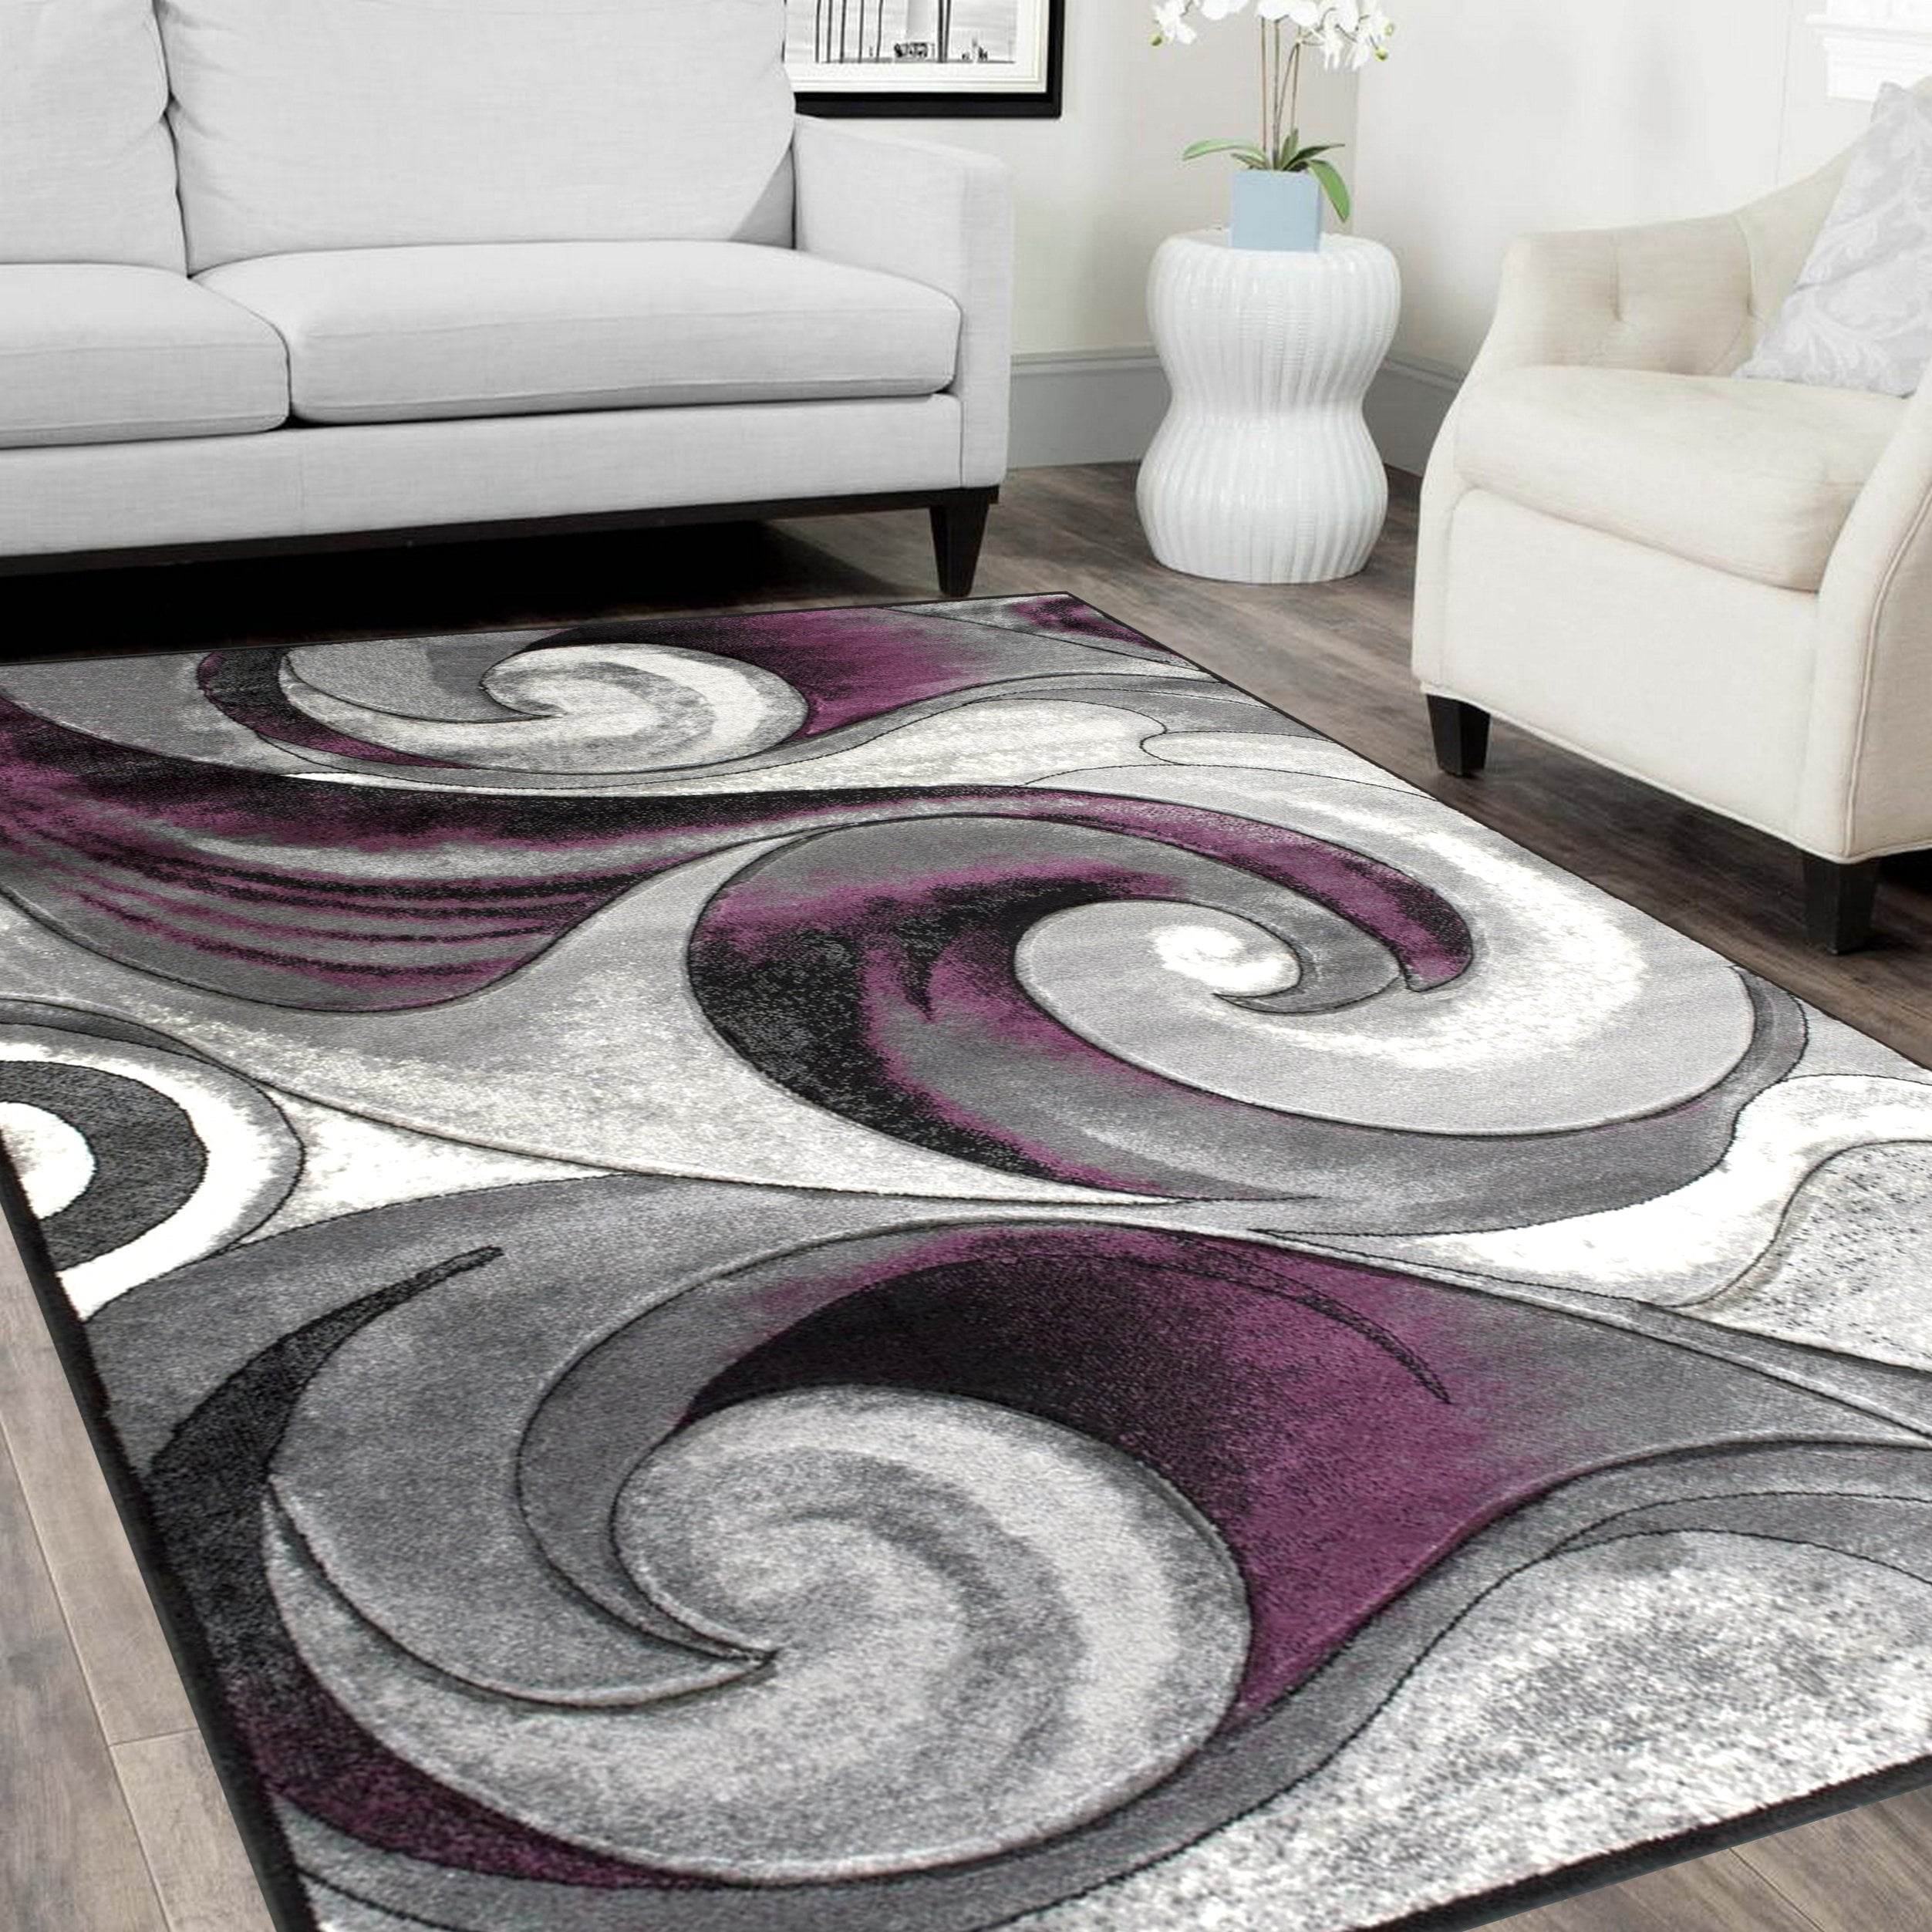 Modern Aprox 4x2 60cm x110cm New Rugs Woven Hand Carved Nice Blocks Black/Silver 